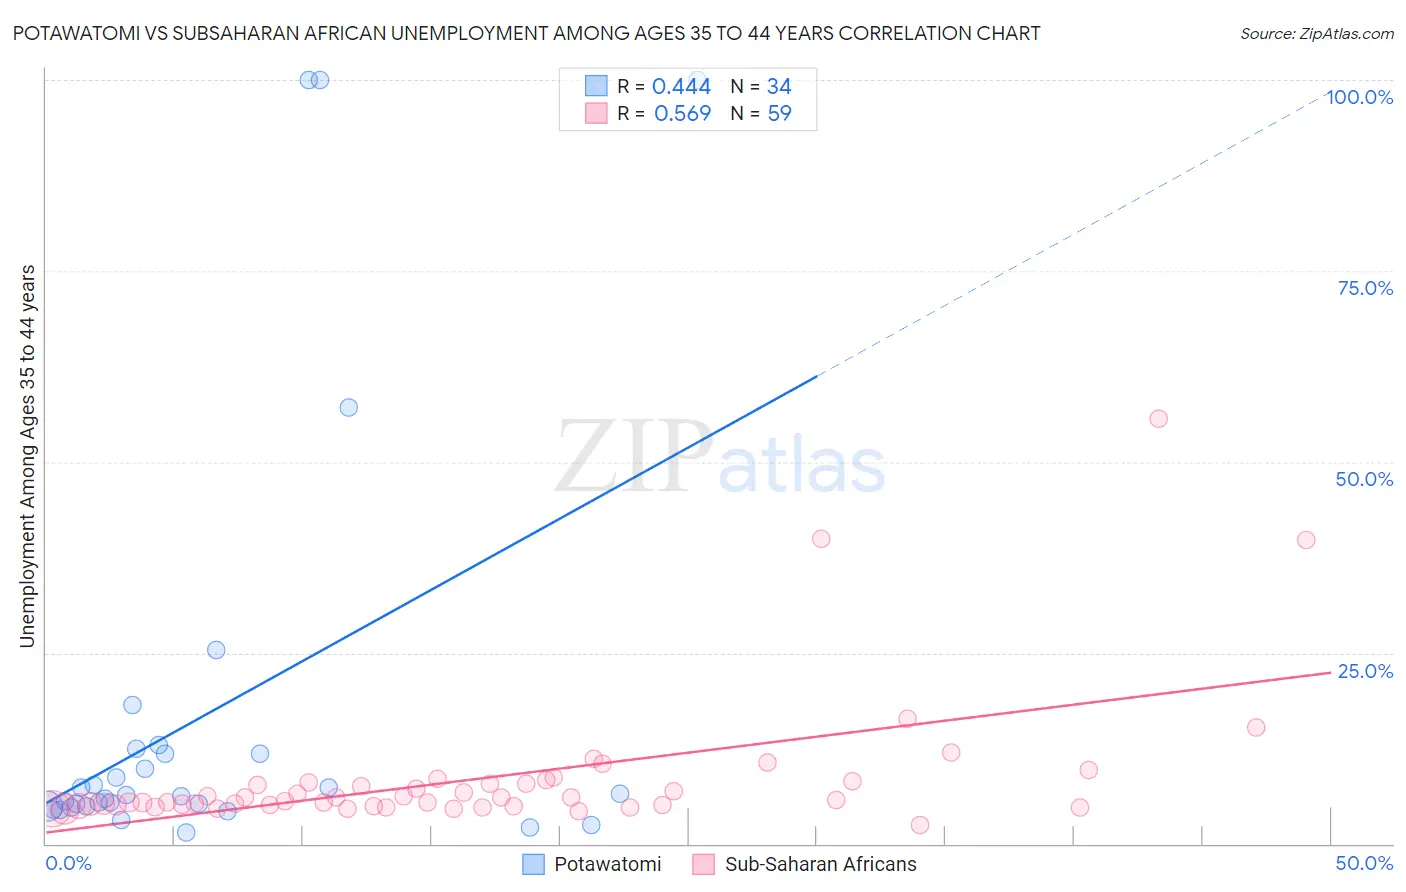 Potawatomi vs Subsaharan African Unemployment Among Ages 35 to 44 years